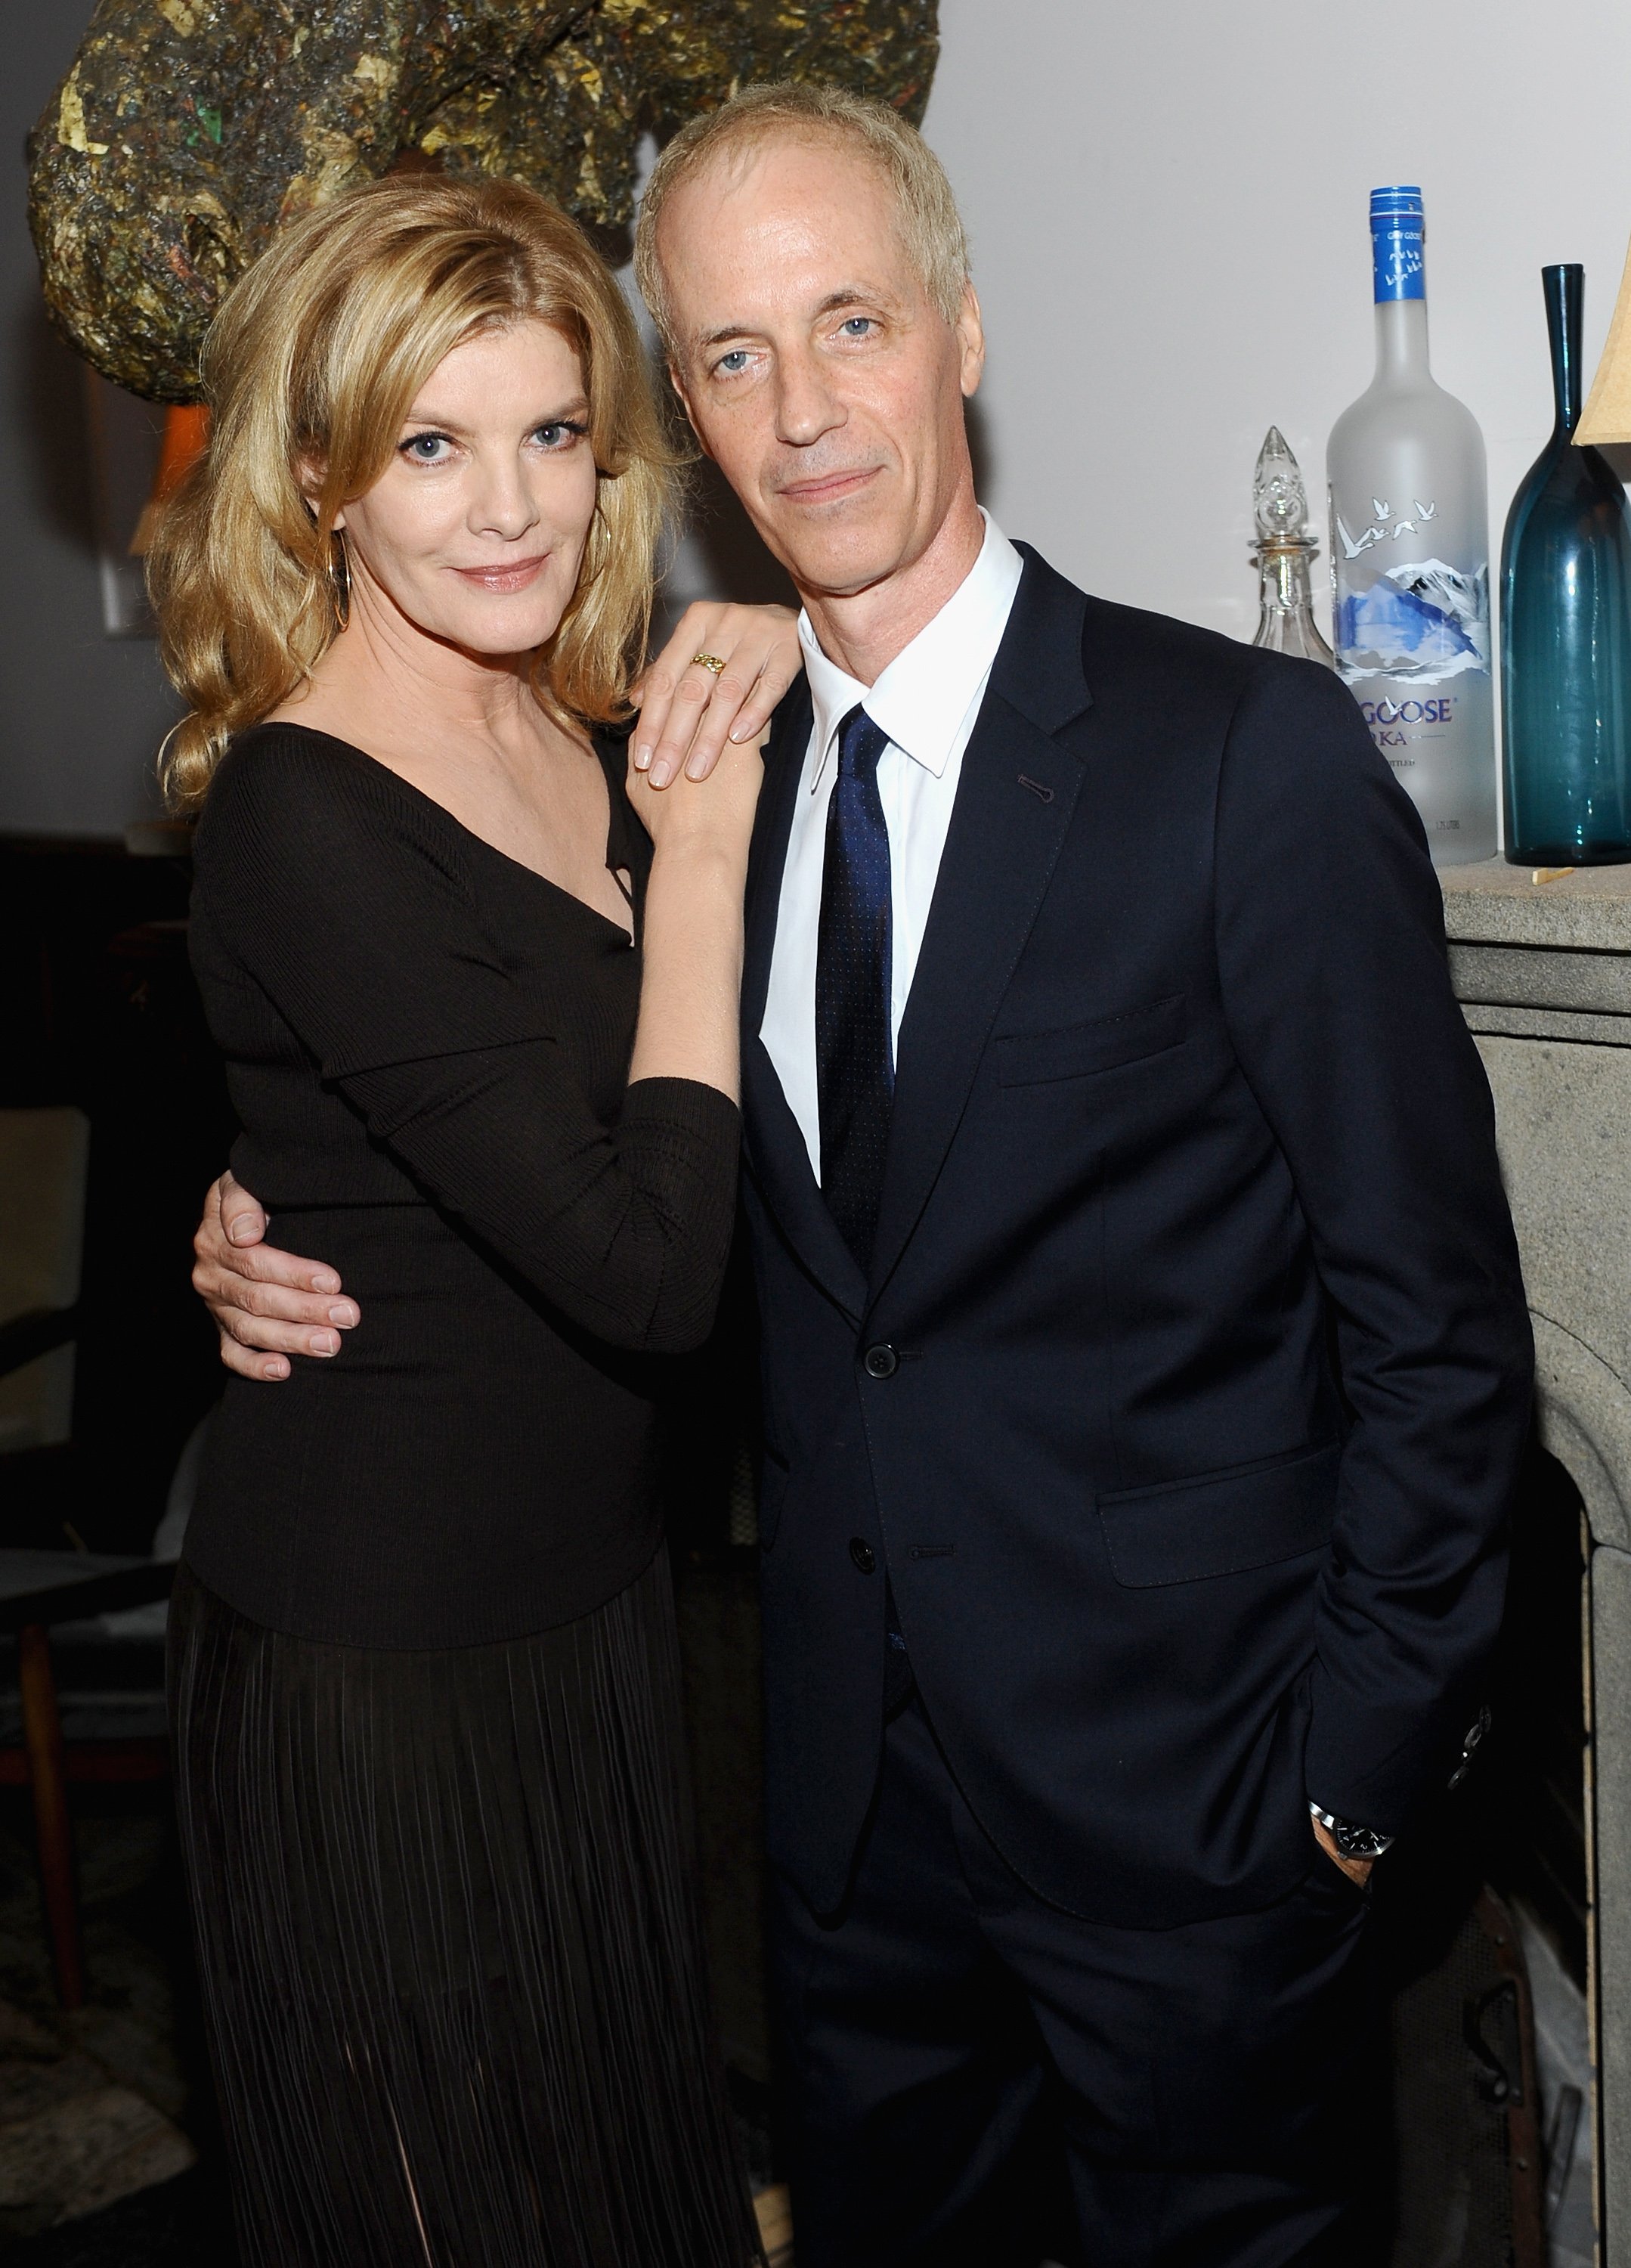 Actress Rene Russo and director Dan Gilroy at the 'NIGHTCRAWLER' World Premiere on September 5, 2014 in Toronto. | Source: Getty Images